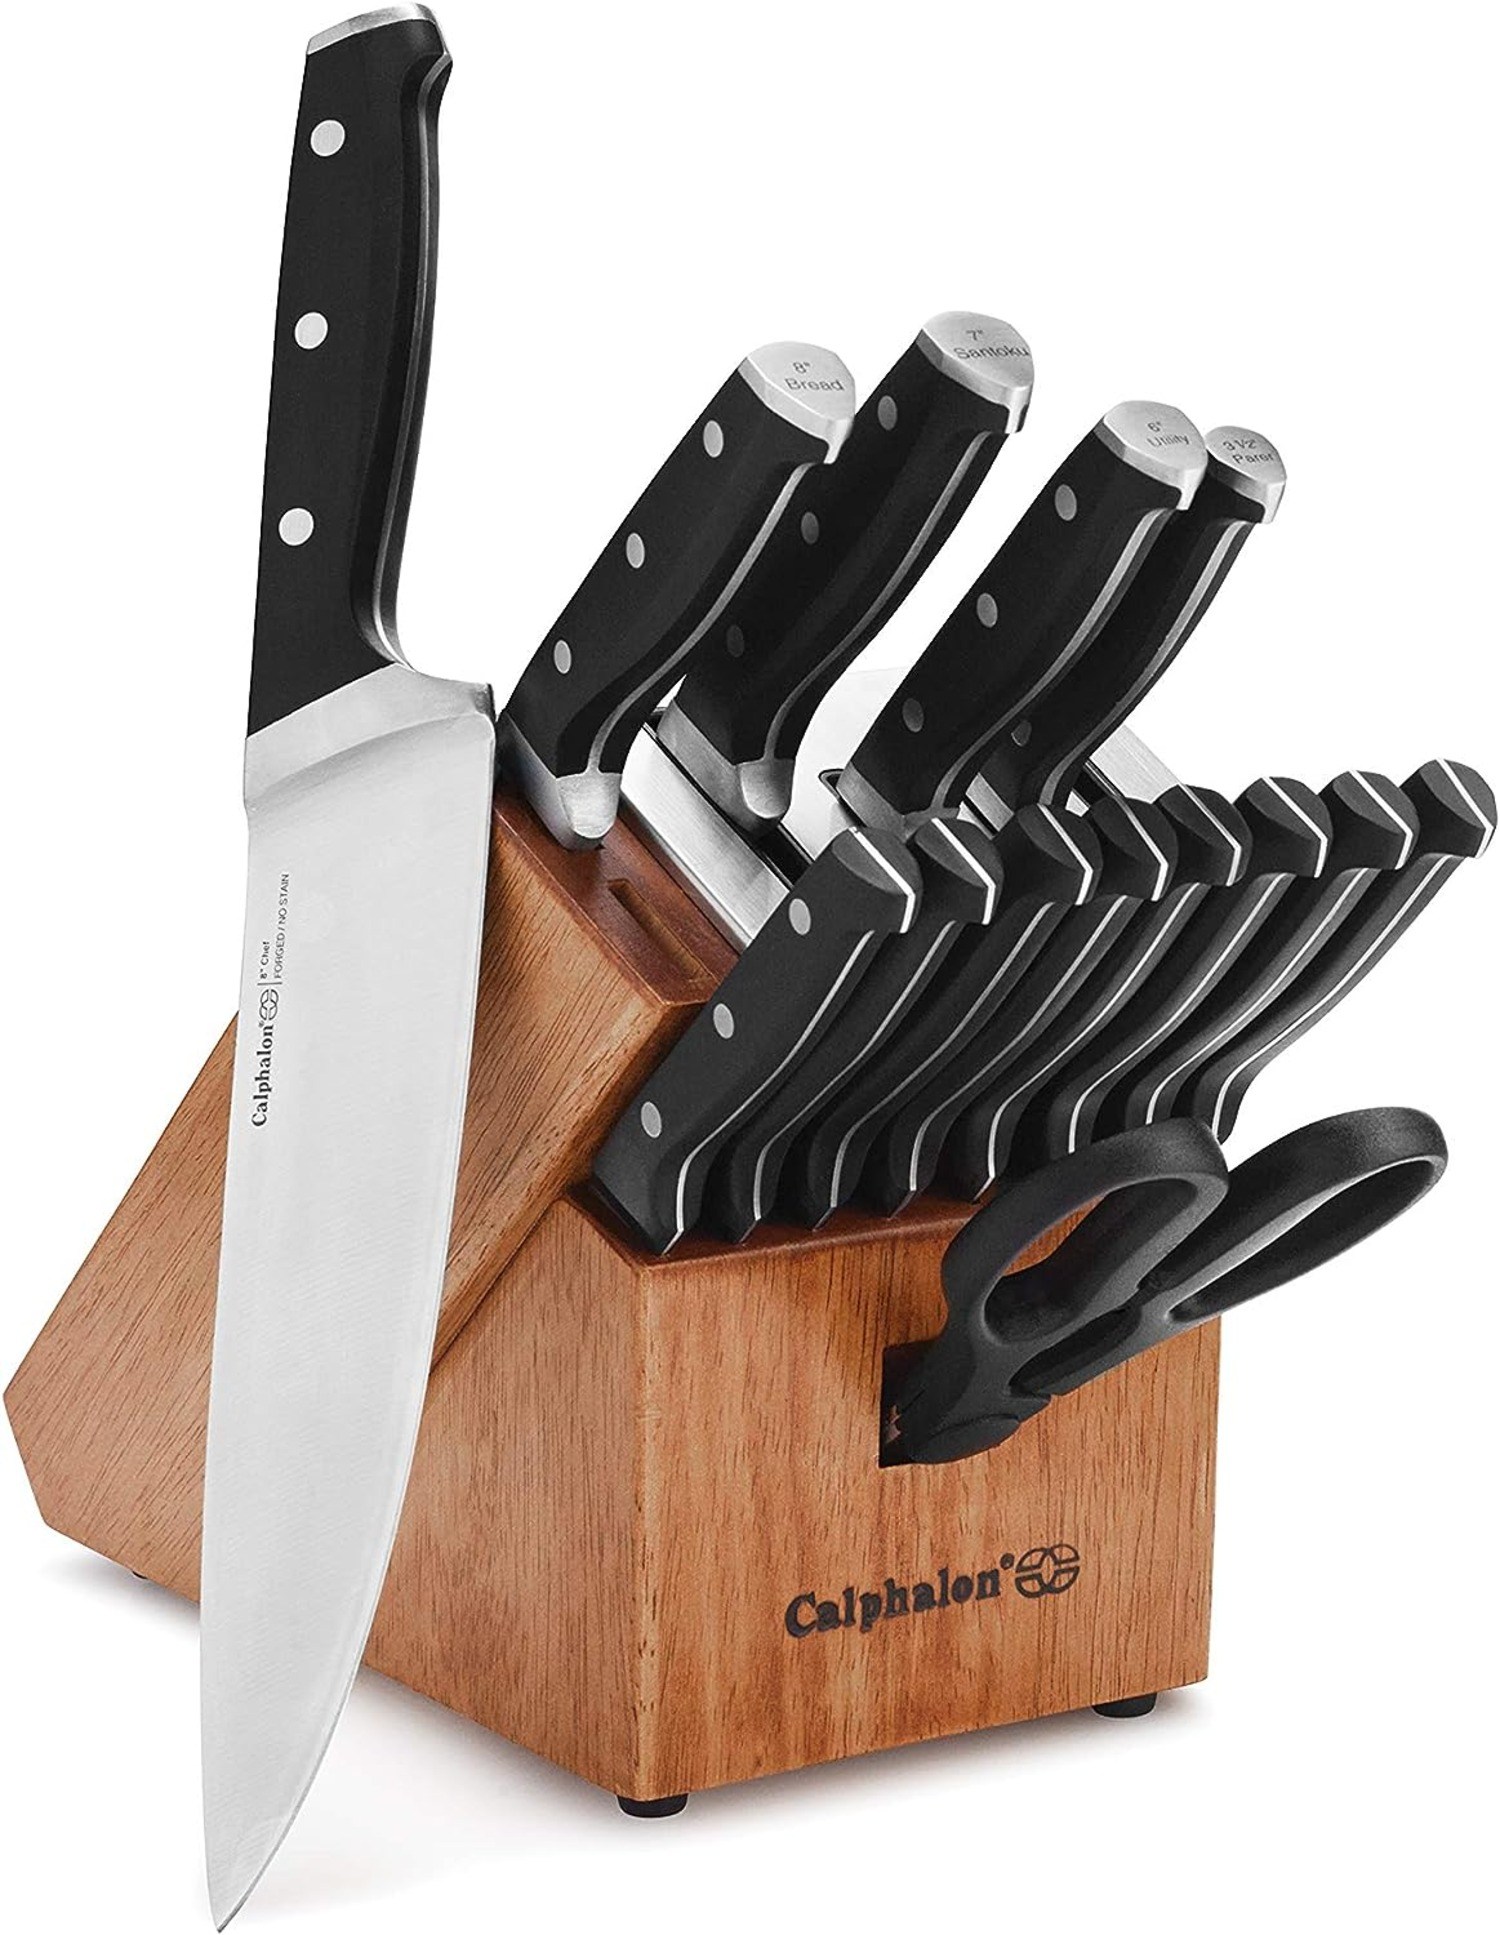 Astercook Knife Set Review: The Ultimate Kitchen Essential with Built-in  Sharpener! 